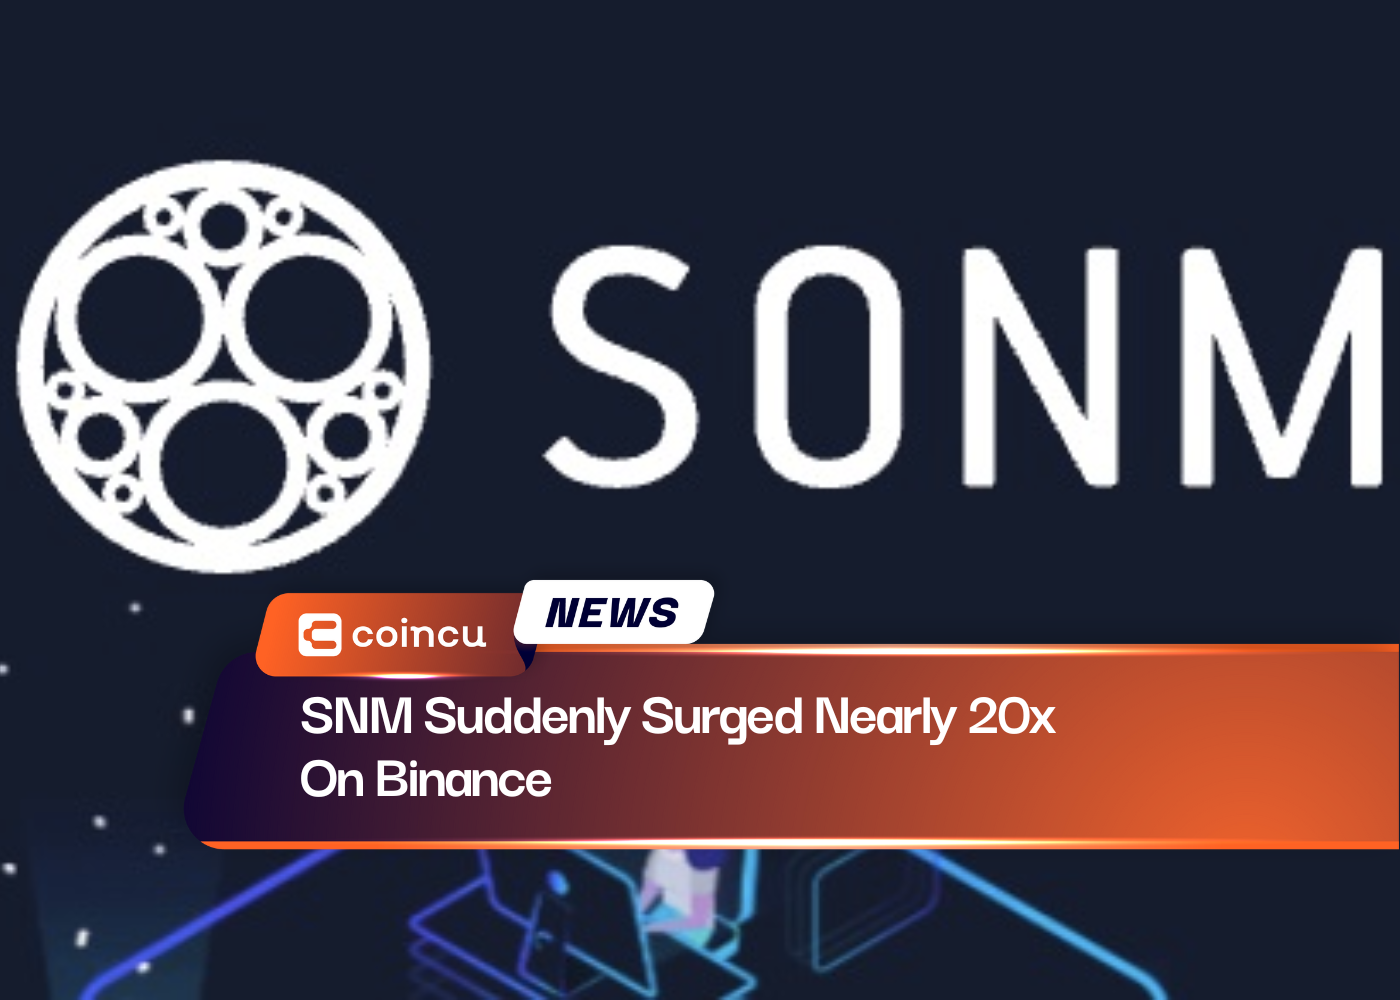 SNM Suddenly Surged Nearly 20x On Binance